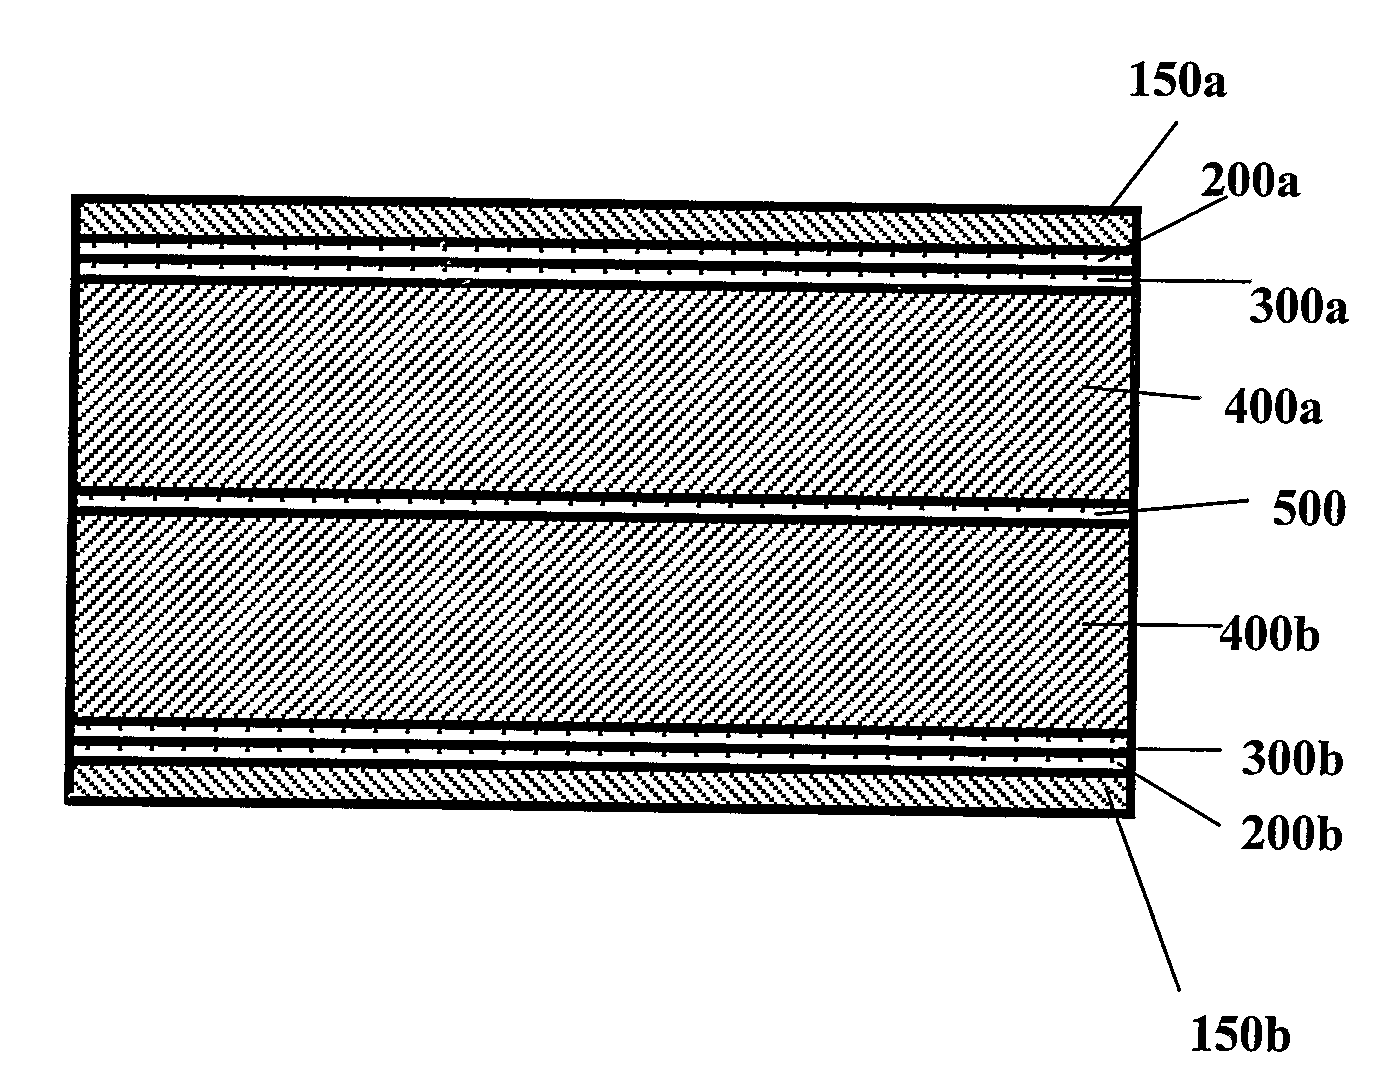 Multi-Layered Product for Printed Circuit Boards, and a Process for Continuous Manufacture of Same